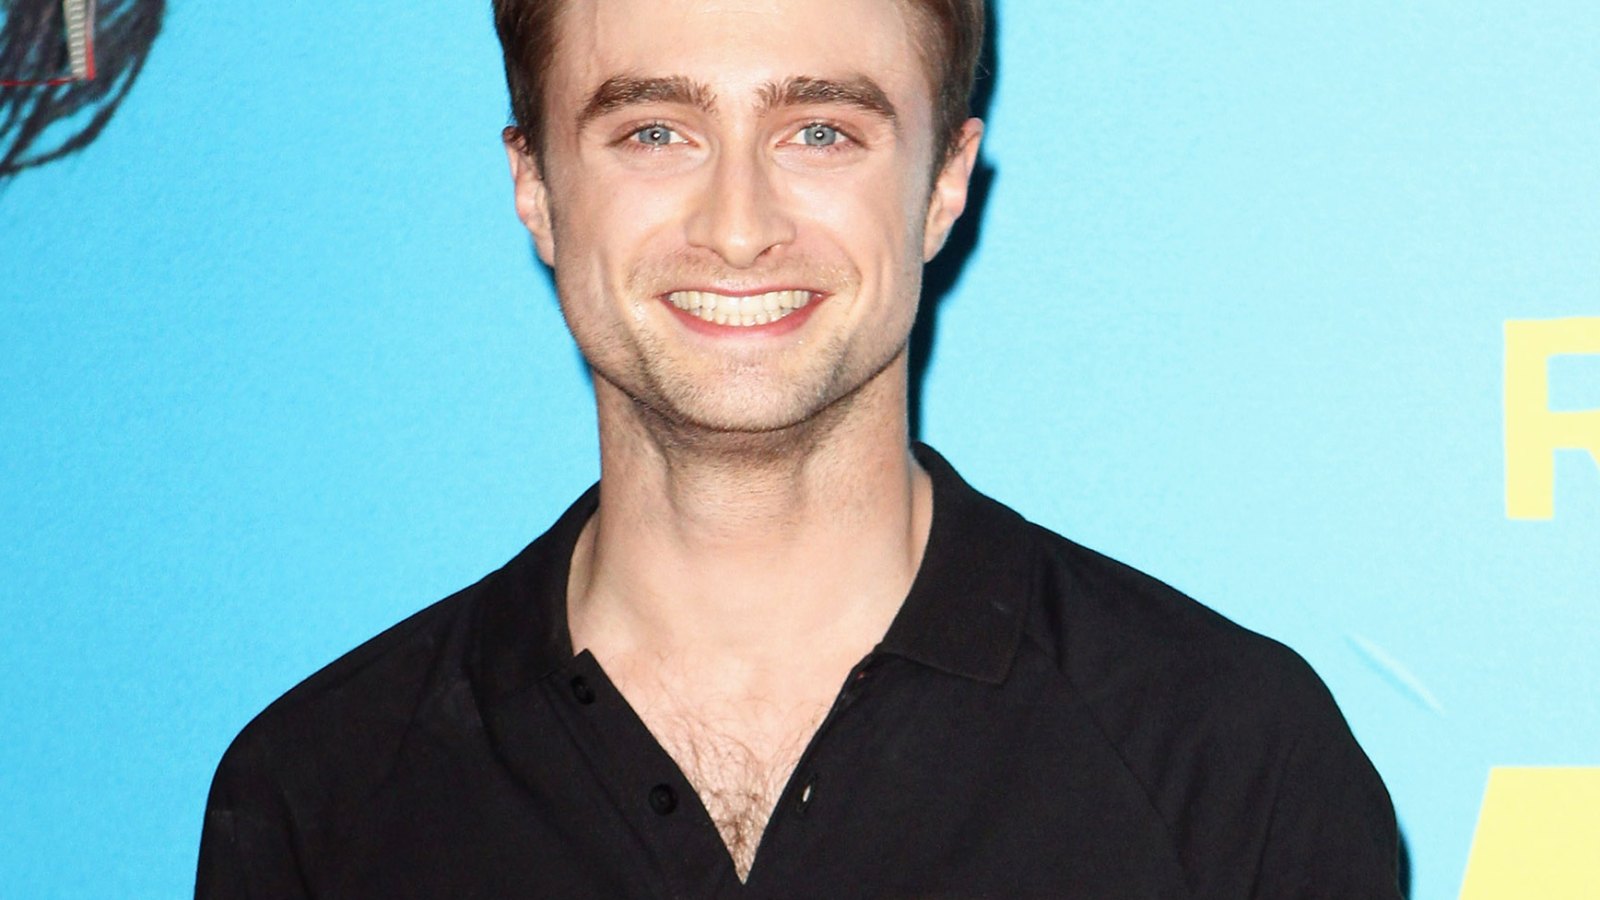 Daniel Radcliffe tells Us Weekly 25 thing you might not know about him